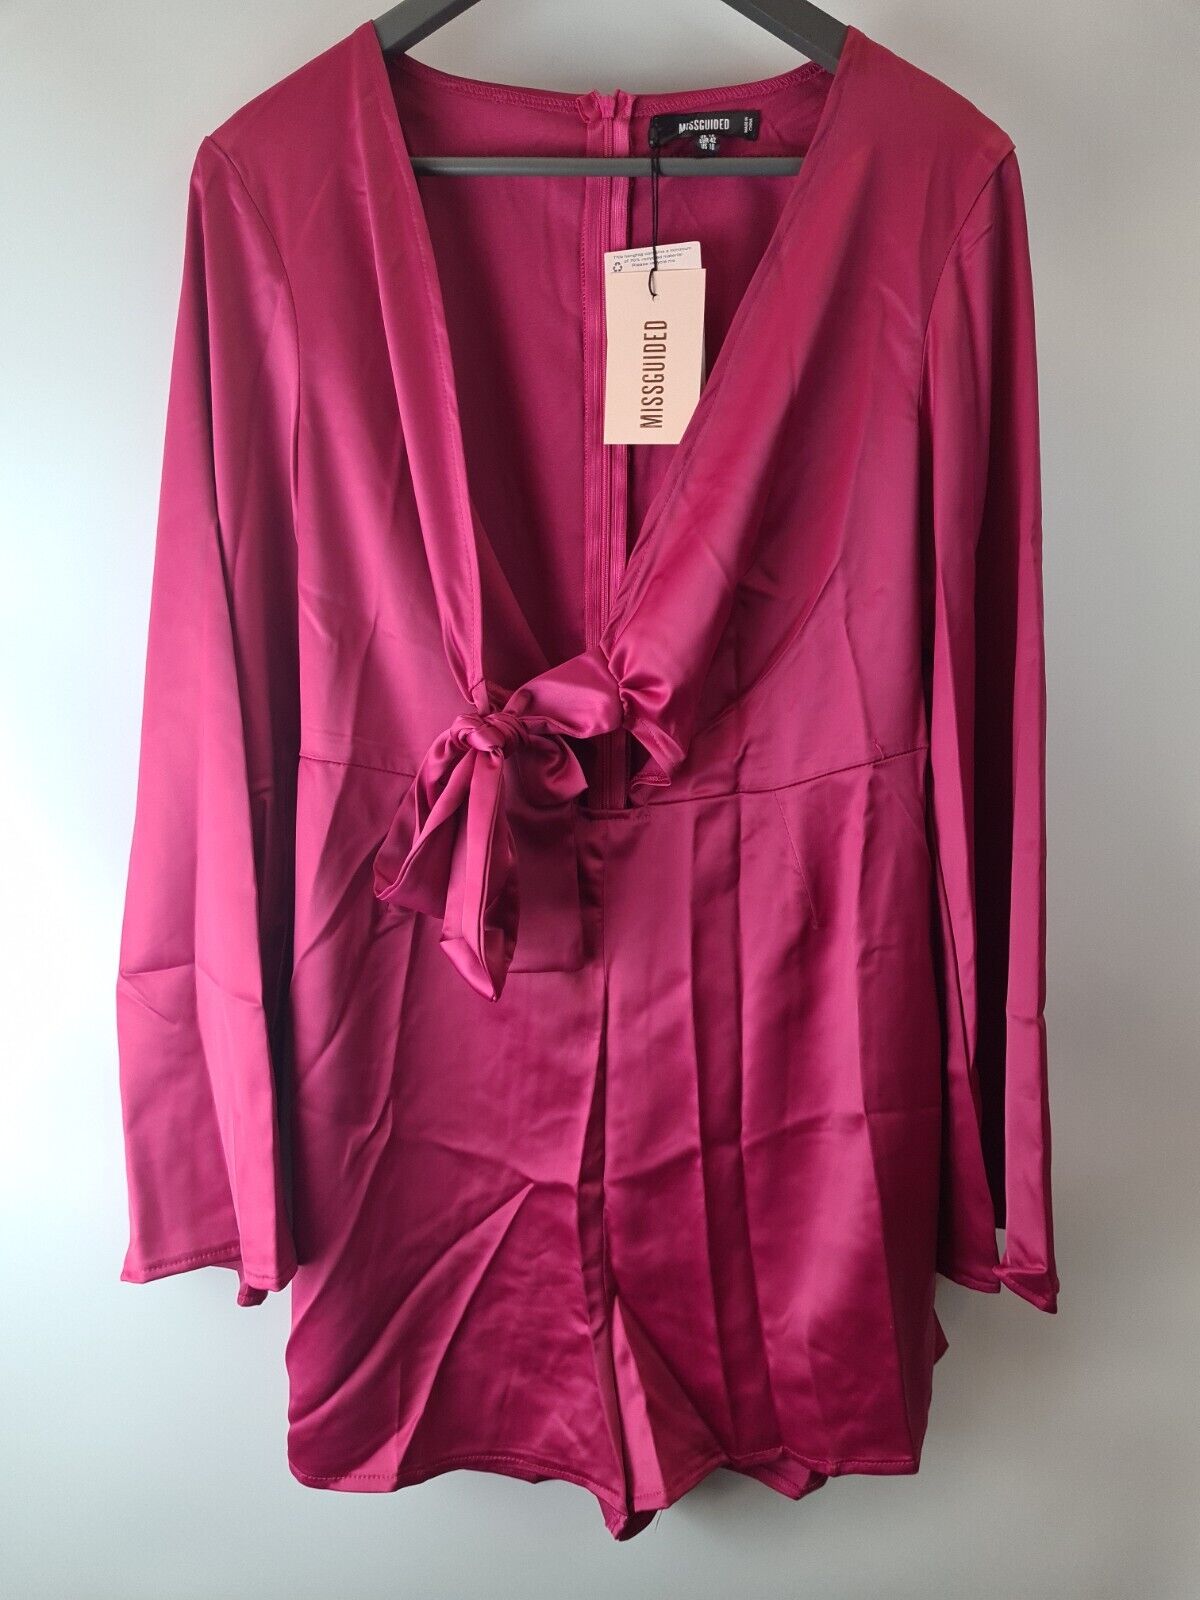 Missguided Satin Tie Front Flare Sleeves Hot Pink Playsuit Size 10 **** V374